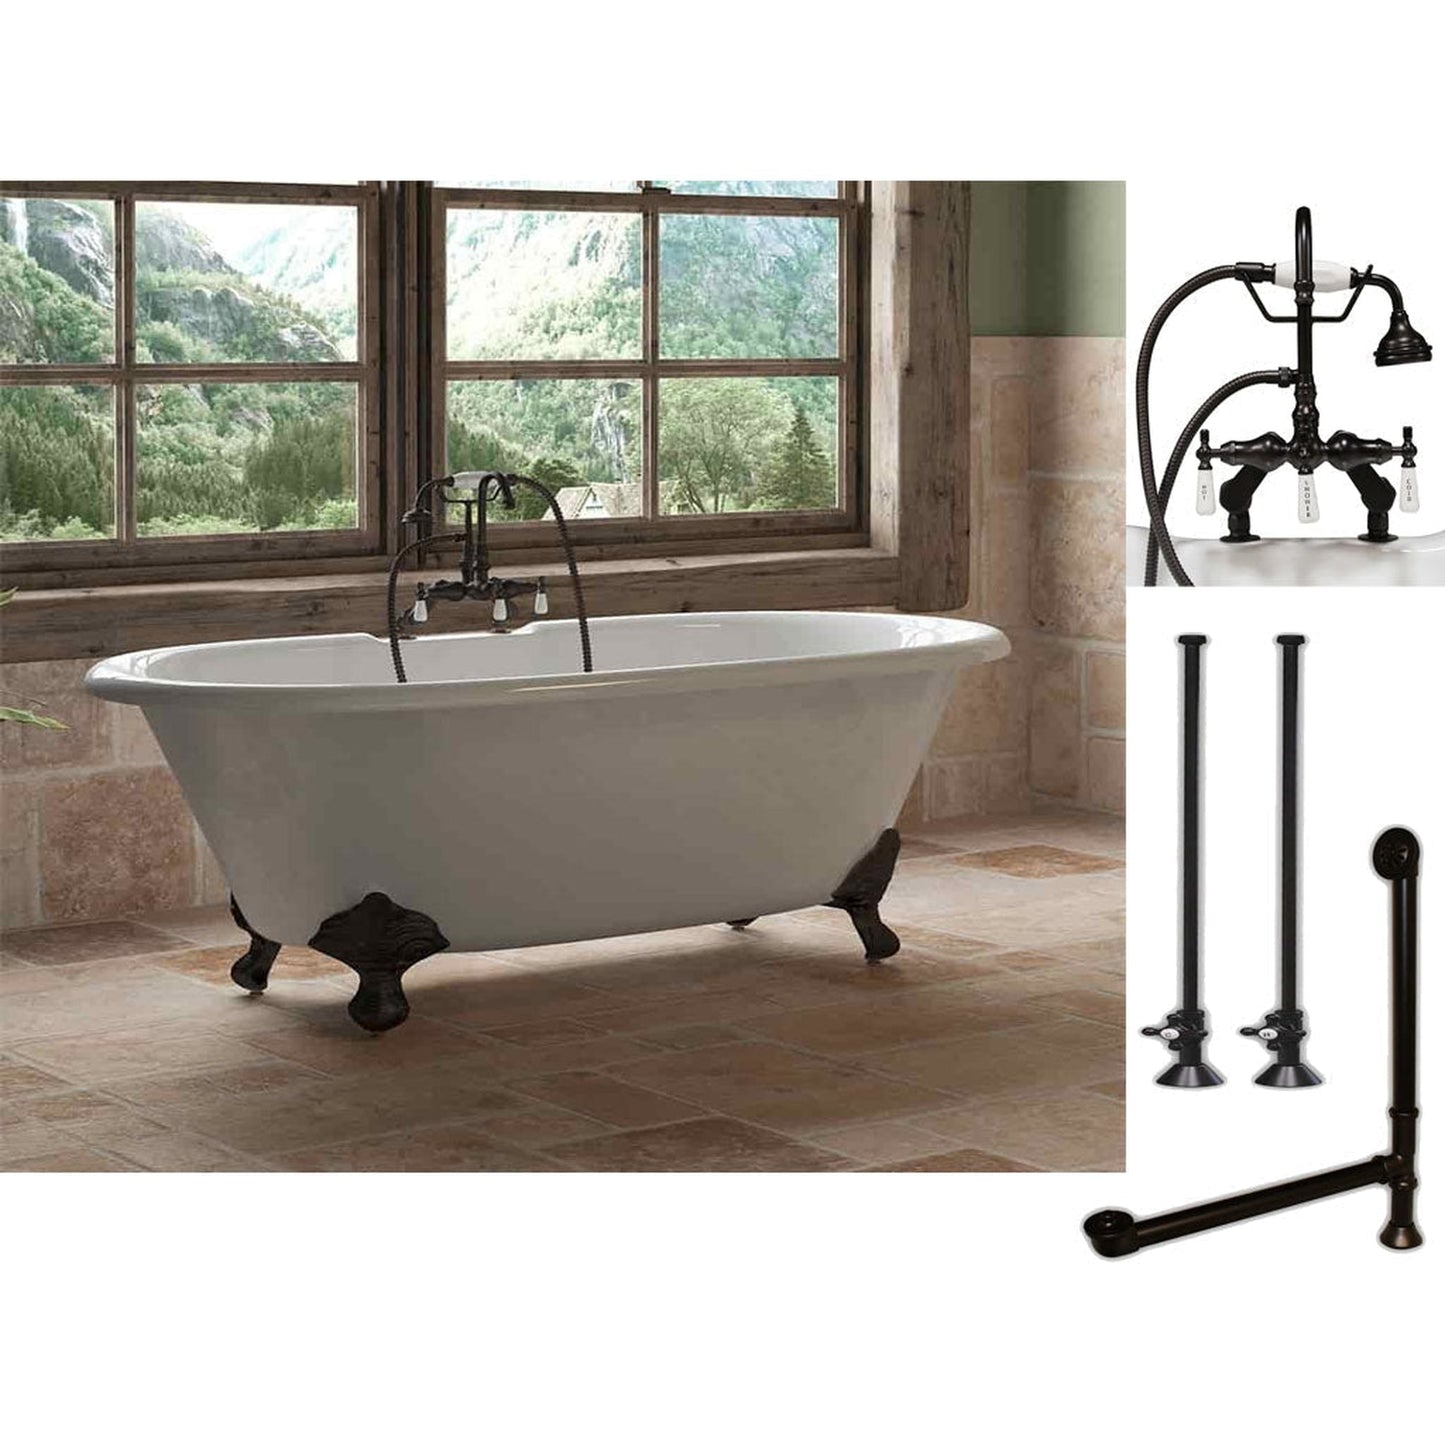 Cambridge Plumbing 67" White Cast Iron Double Ended Clawfoot Bathtub With Deck Holes And Complete Plumbing Package Including Porcelain Lever English Telephone Brass Faucet, Supply Lines, Drain And Overflow Assembly In Oil Rubbed Bronze